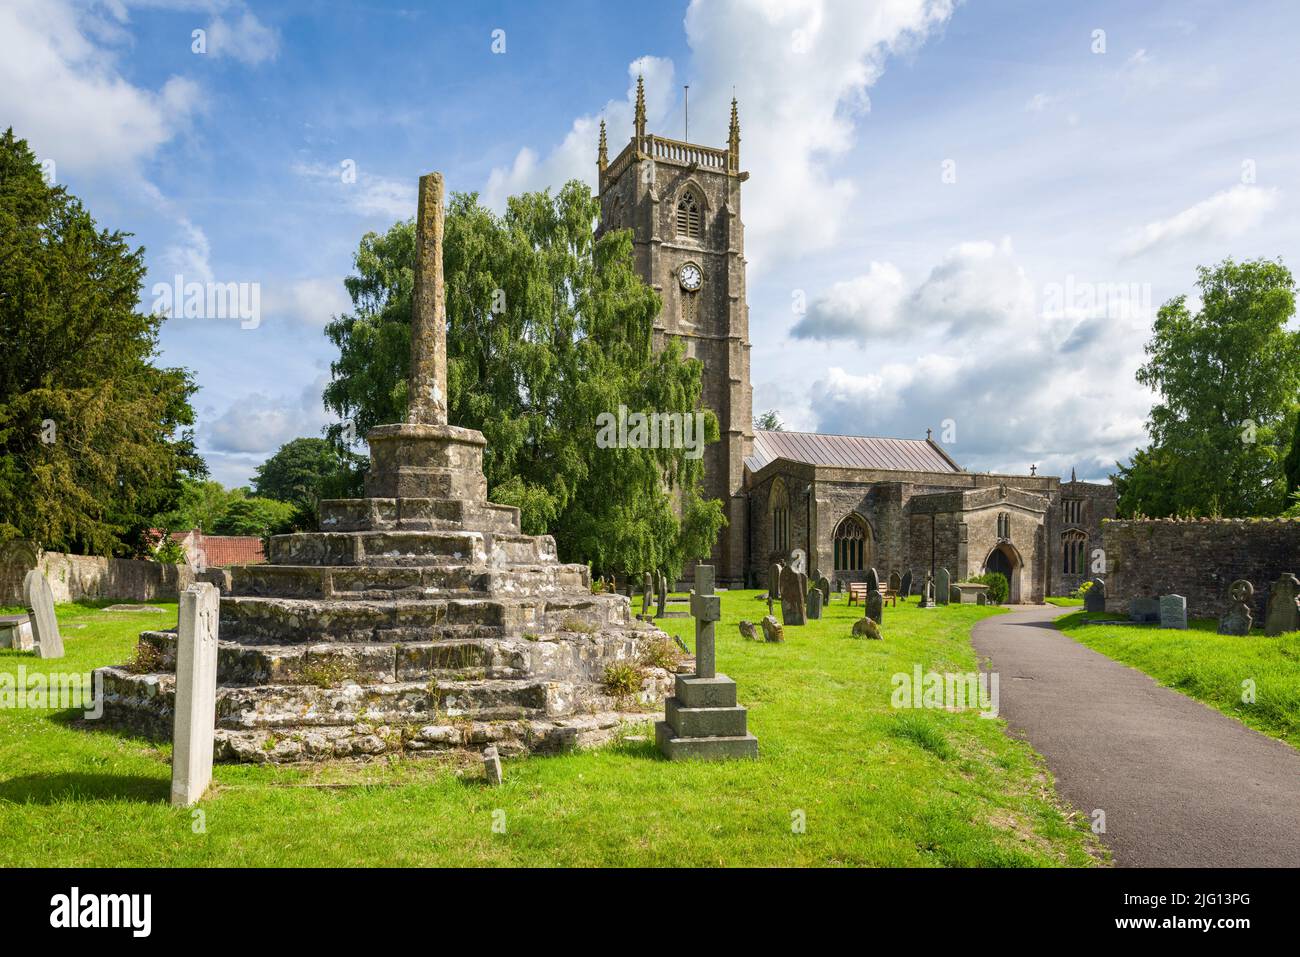 The Church of St Andrew and the churchyard cross in the village of Chew Magna, Somerset, England. Stock Photo